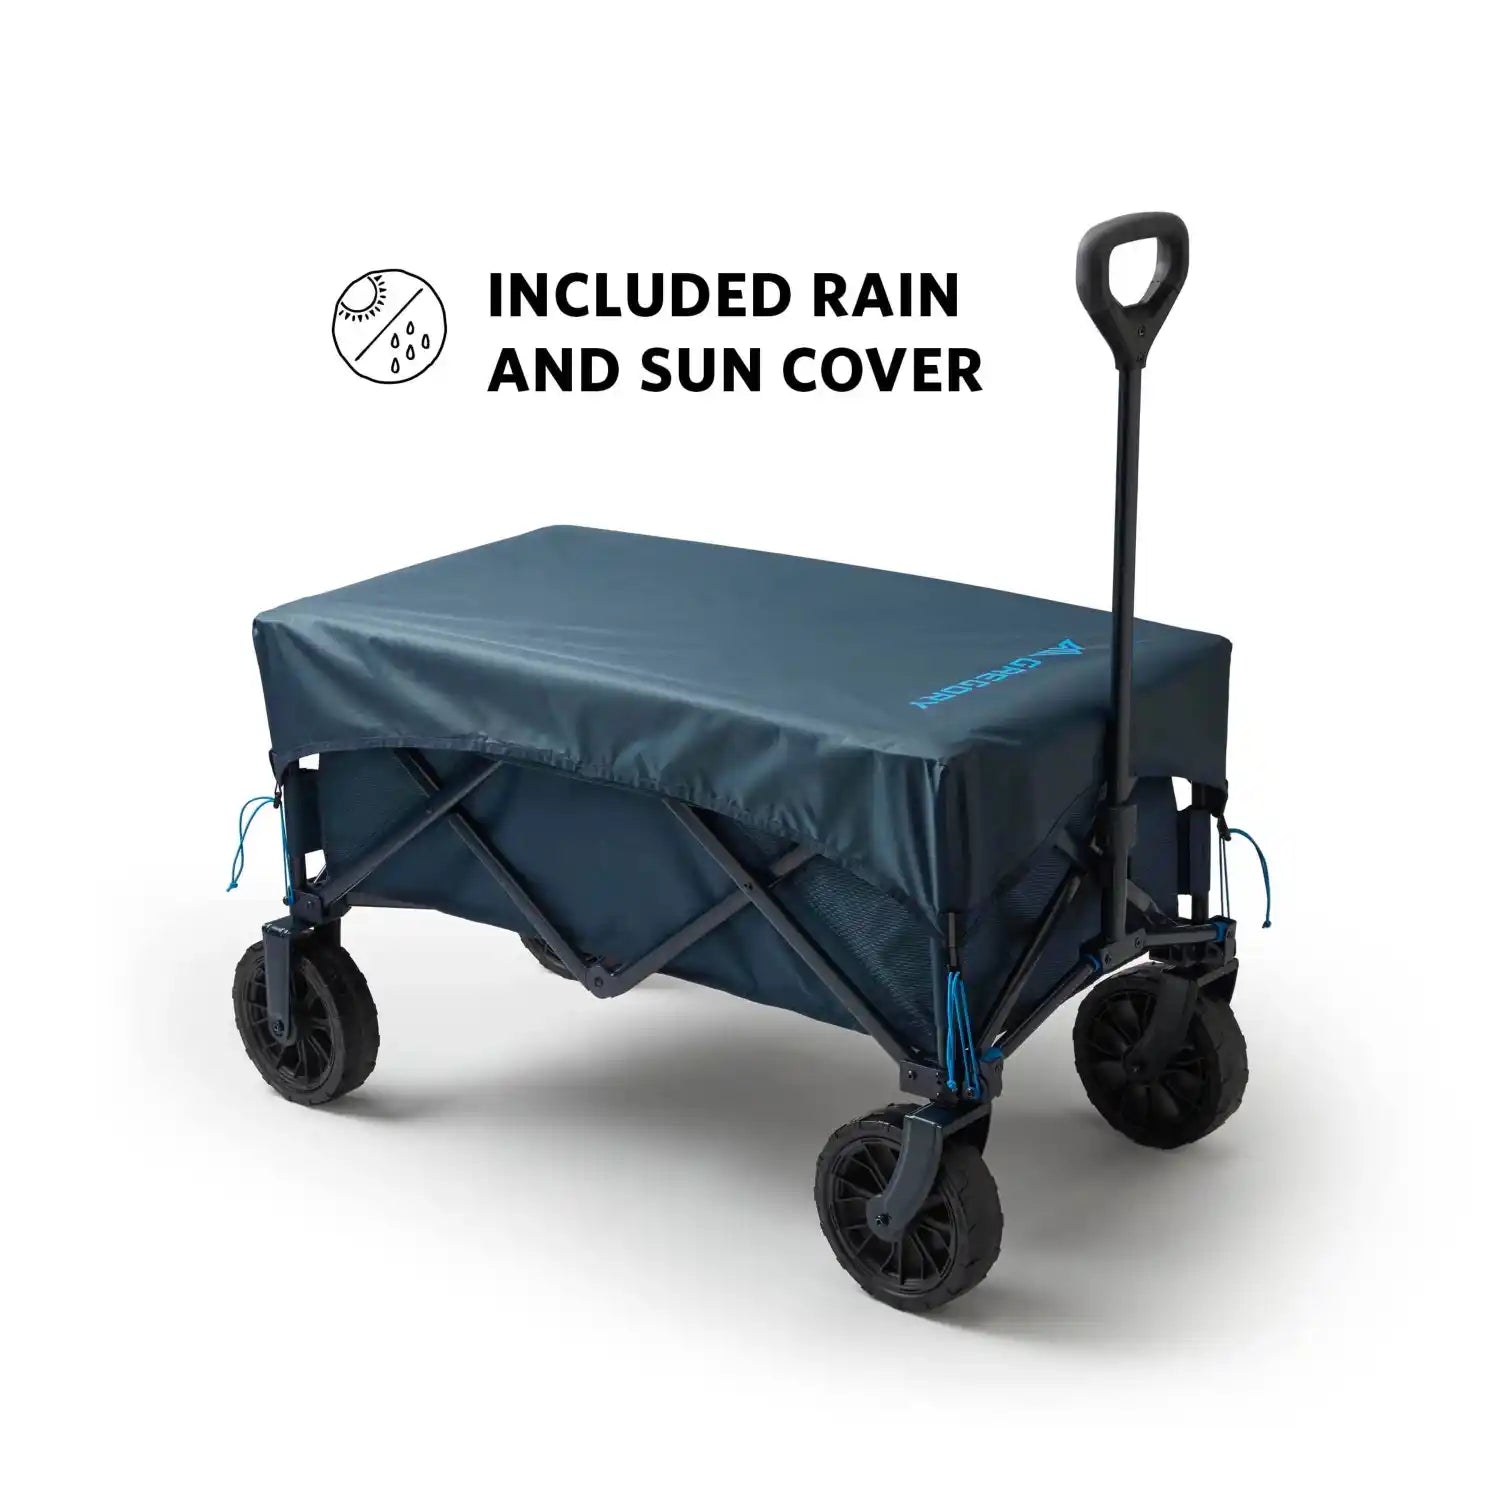 Gregory Alpaca Gear Wagon, Slate Blue, view of wagon with cover 